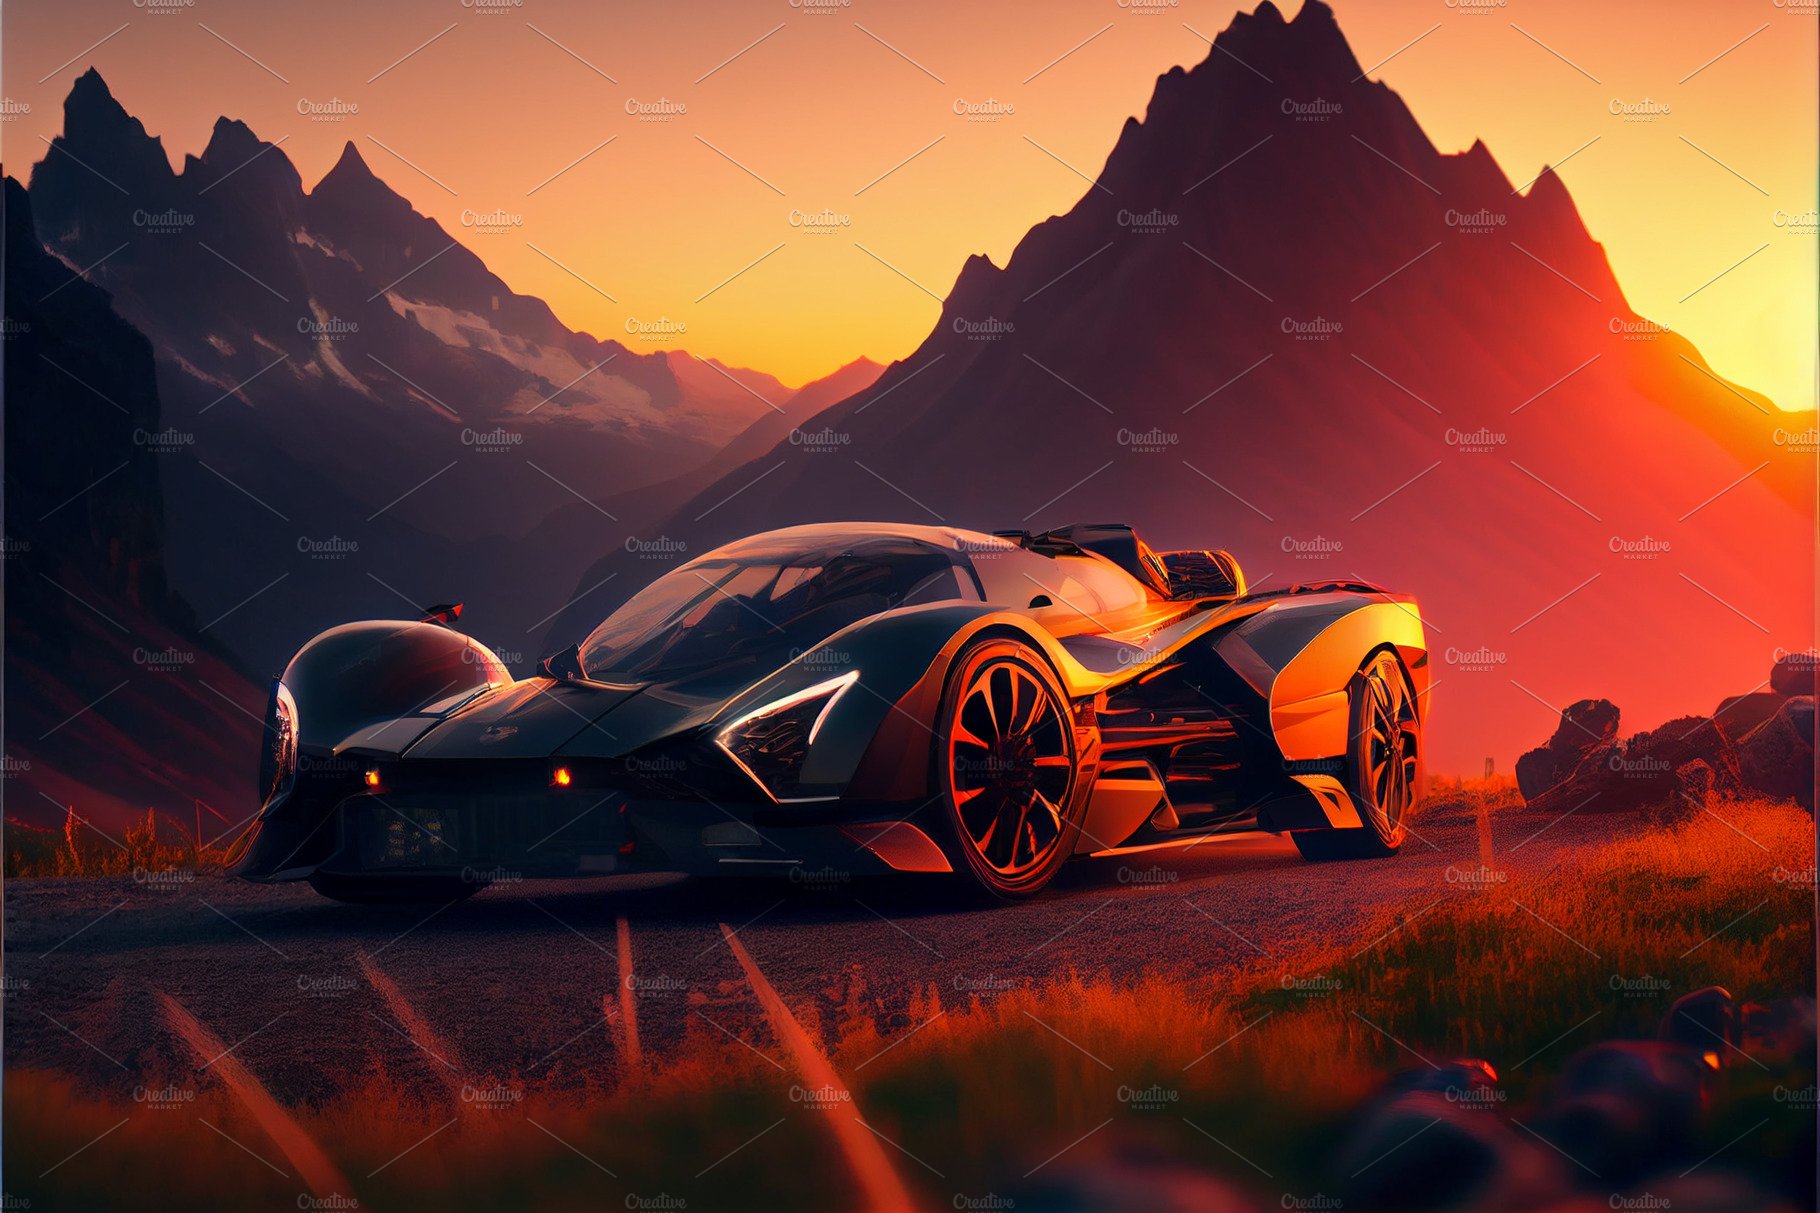 futuristic concept car driving in mountains at sunset cover image.